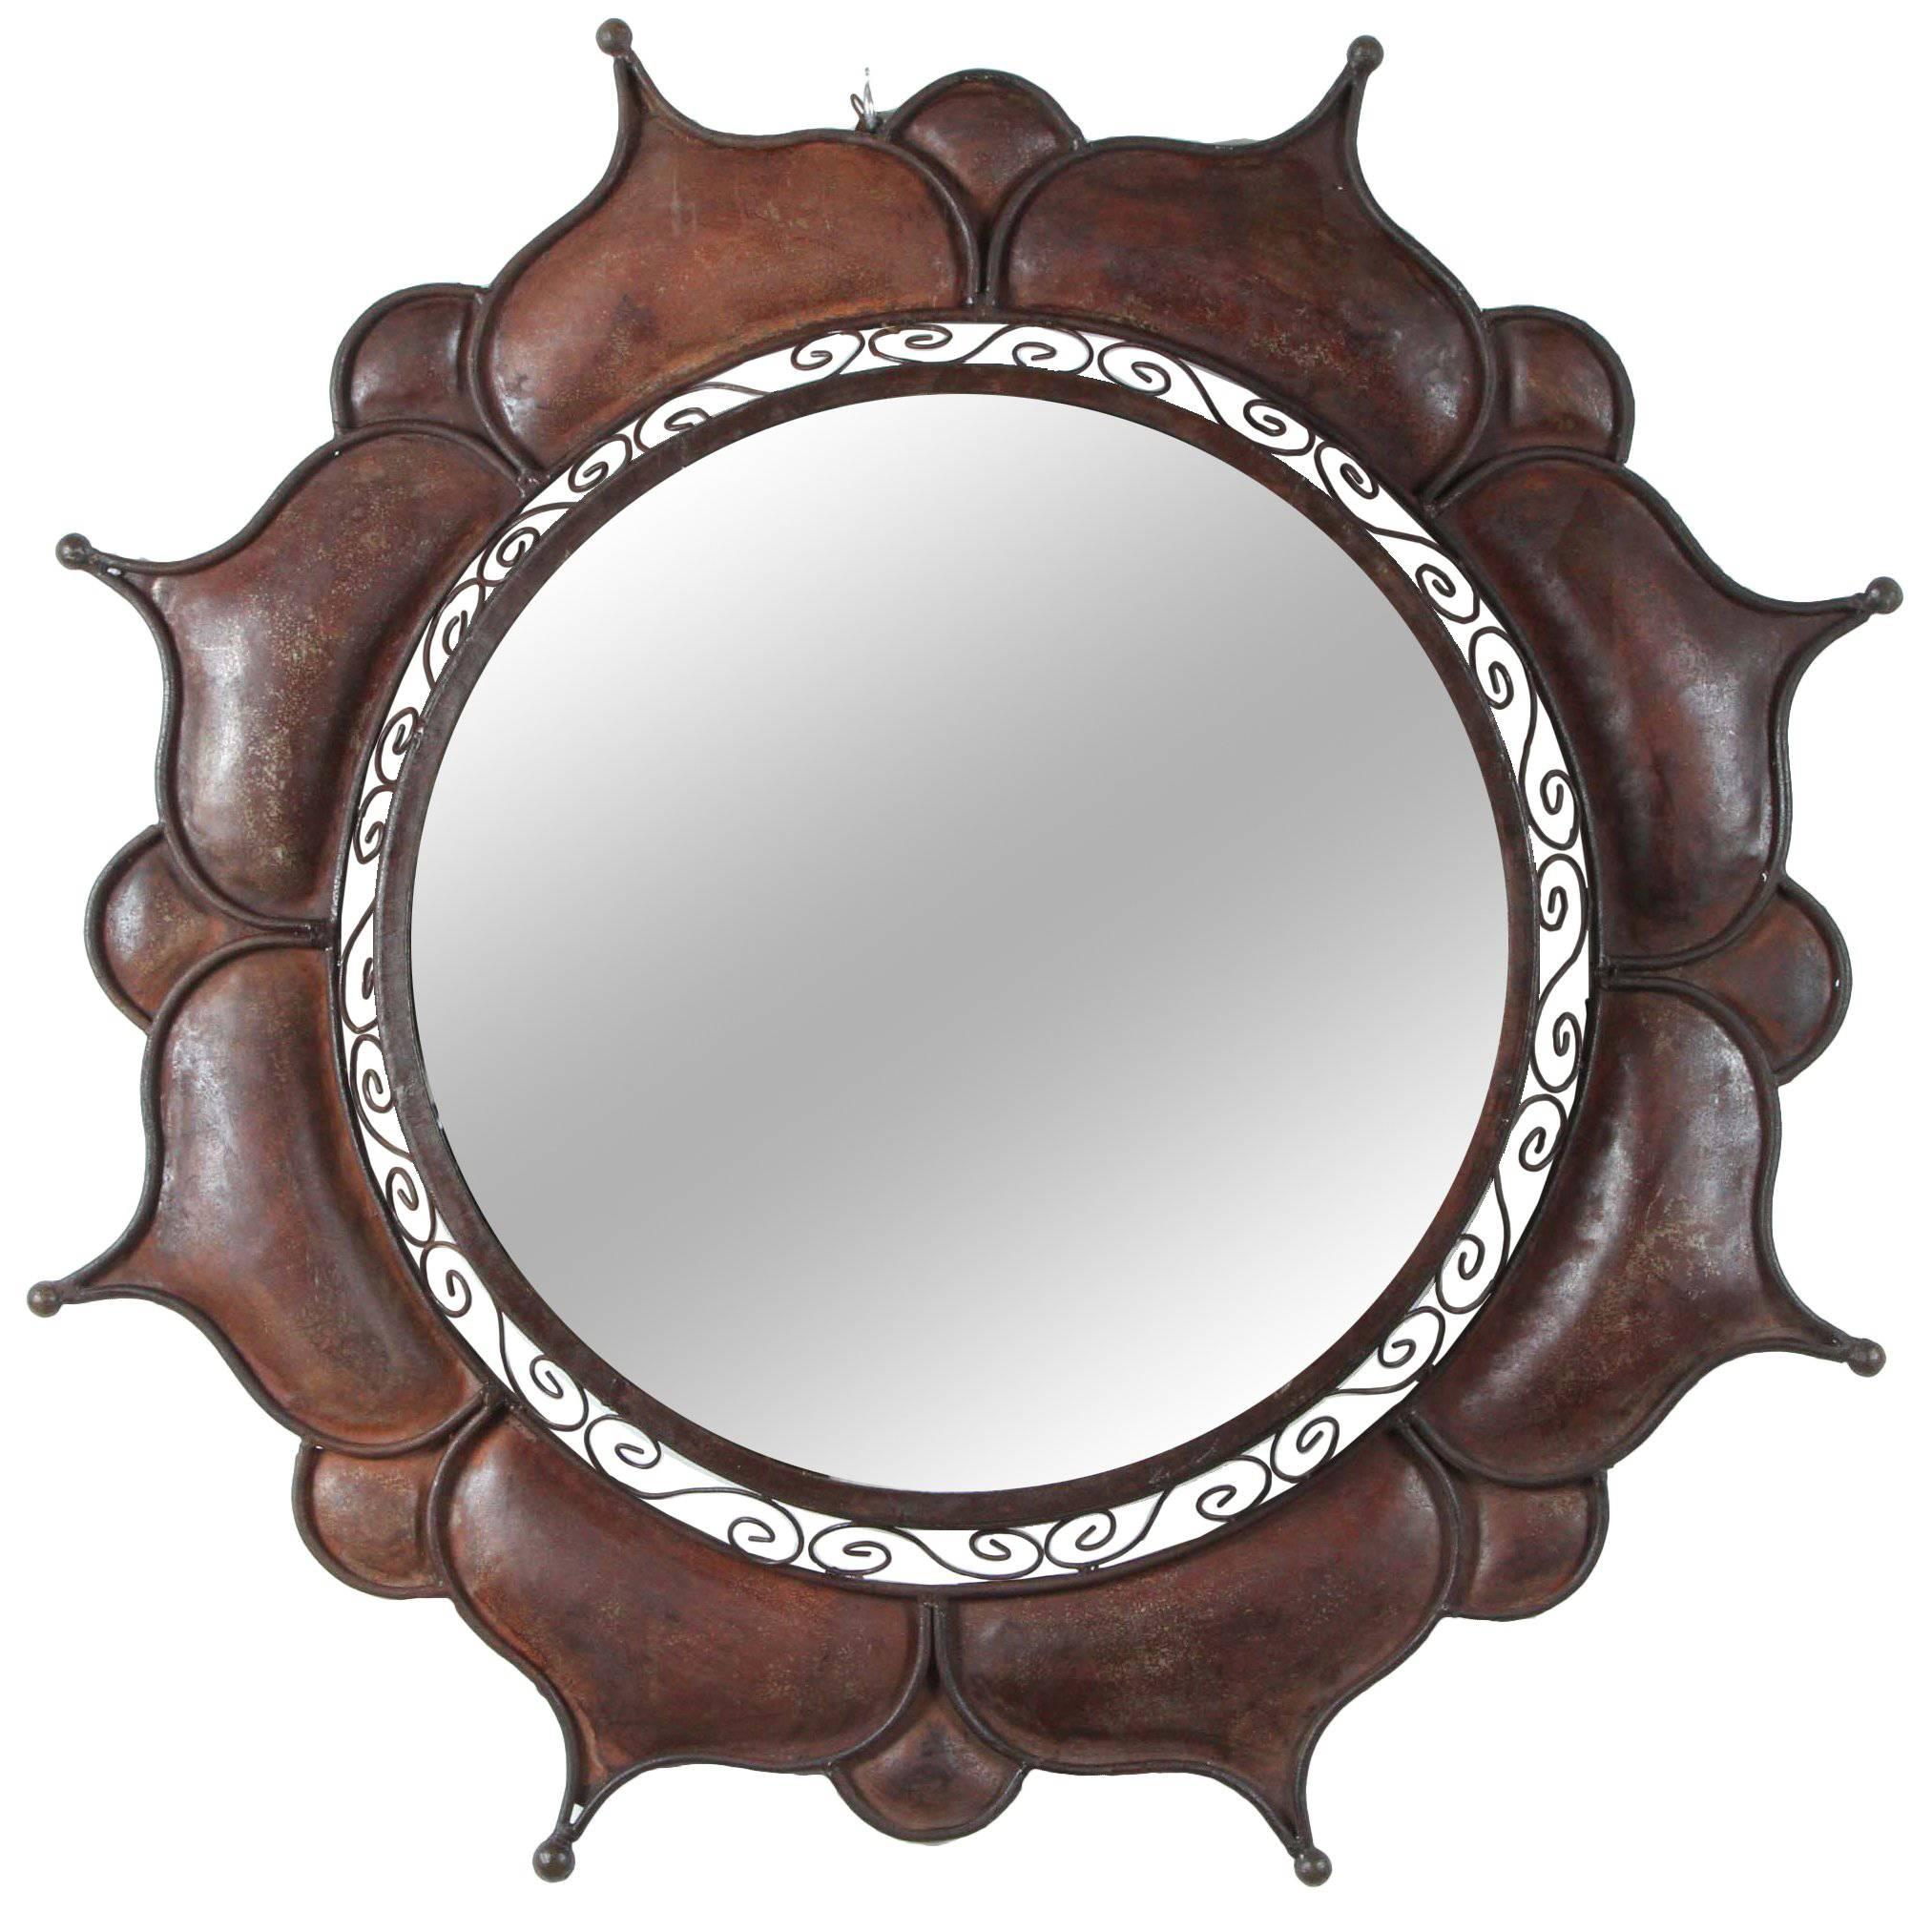 Brutalist Curtis Jere Style Handcrafted Round Outdoor Wall Mirror